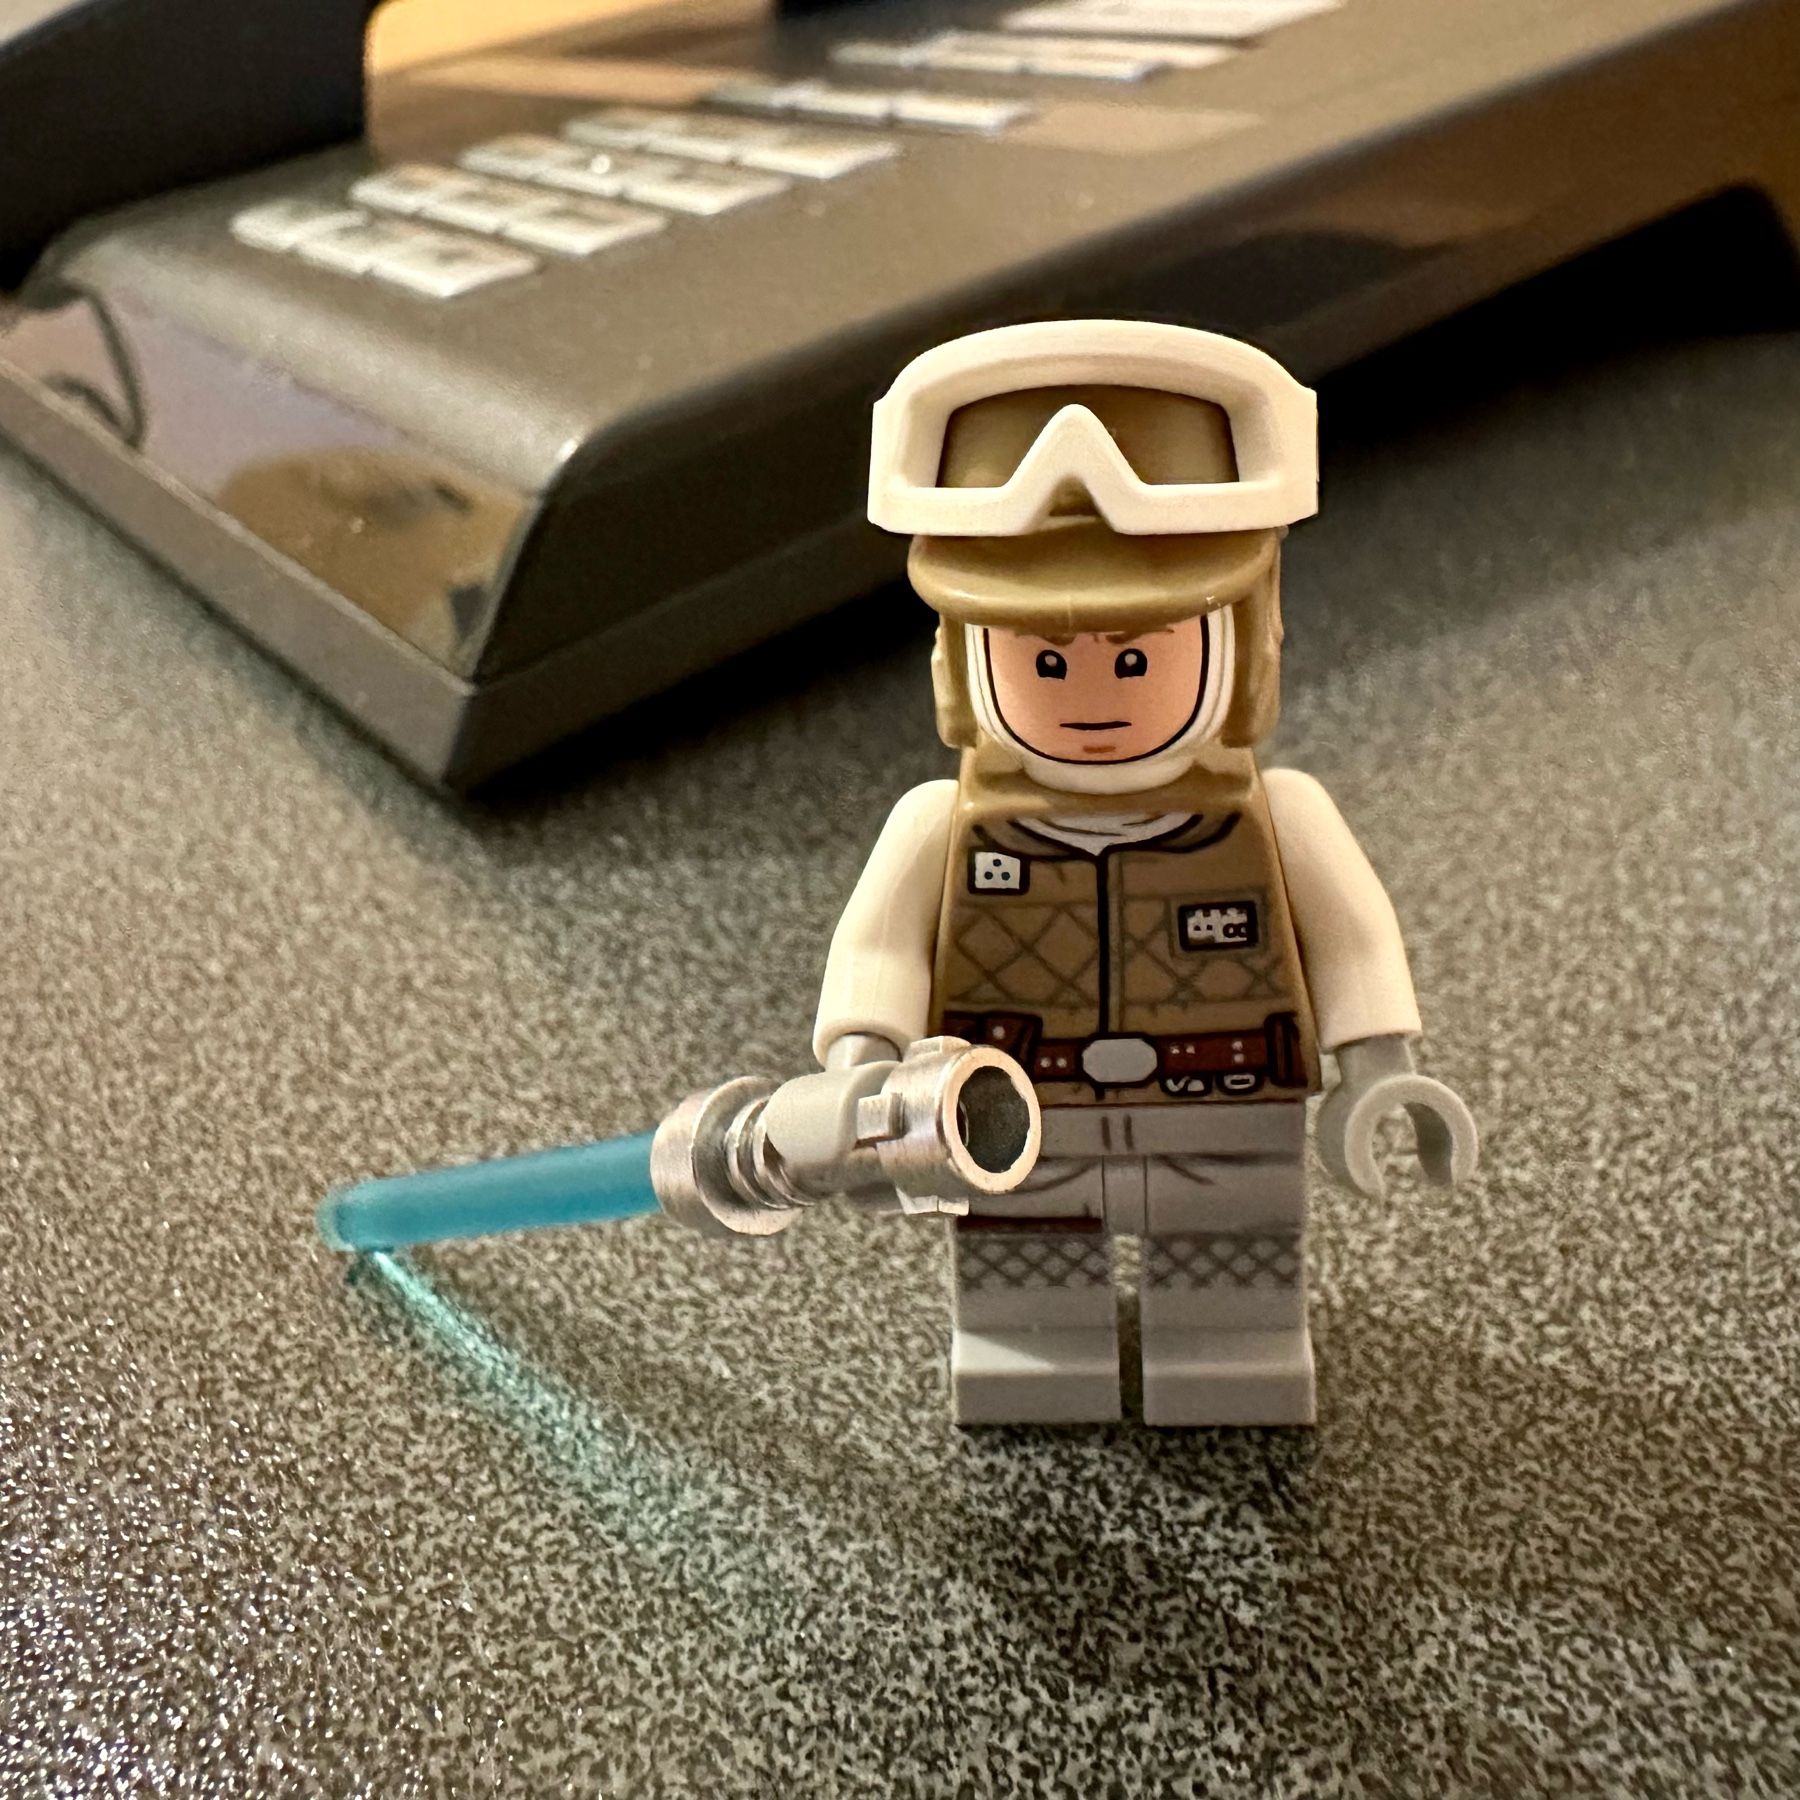 LEGO Luke Skywalker dressed in his Hoth cold weather outfit with a grim expression and wielding a blue lightsaber